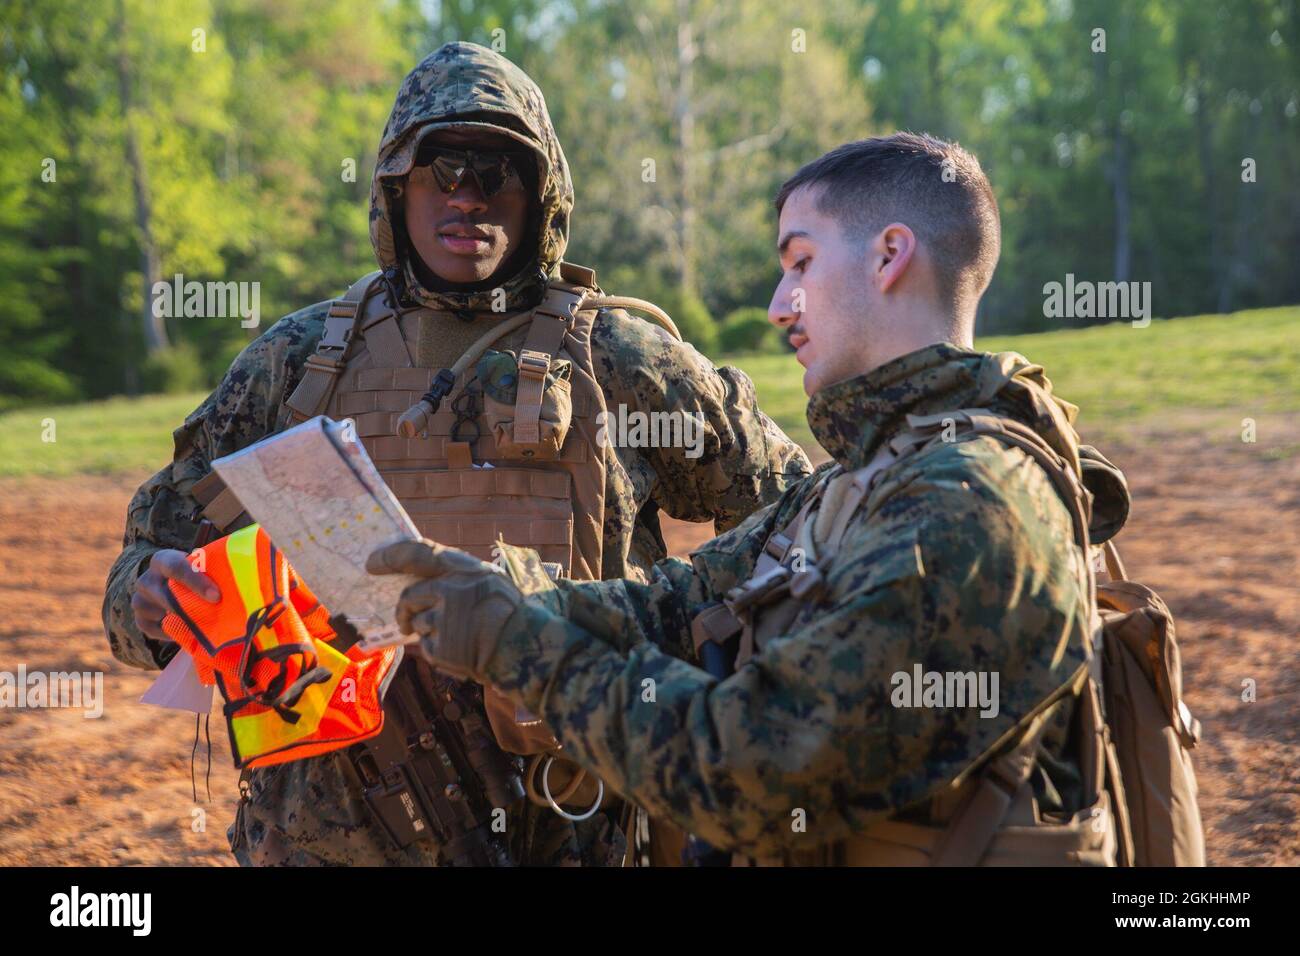 U.S. Marine Corps Lance Corporal Anthoney Morris and Corporal Gregory Seraphin, Marine Air-Ground Task Force planning specialists with Headquarters and Service Battalion, U.S. Marine Corps Forces Command, review their land navigation route at Quantico, Virginia, April 23, 2021. During the field training exercise, Marines conducted land navigation and close, long and unknown distance shooting while building squad level operational cohesion. Stock Photo